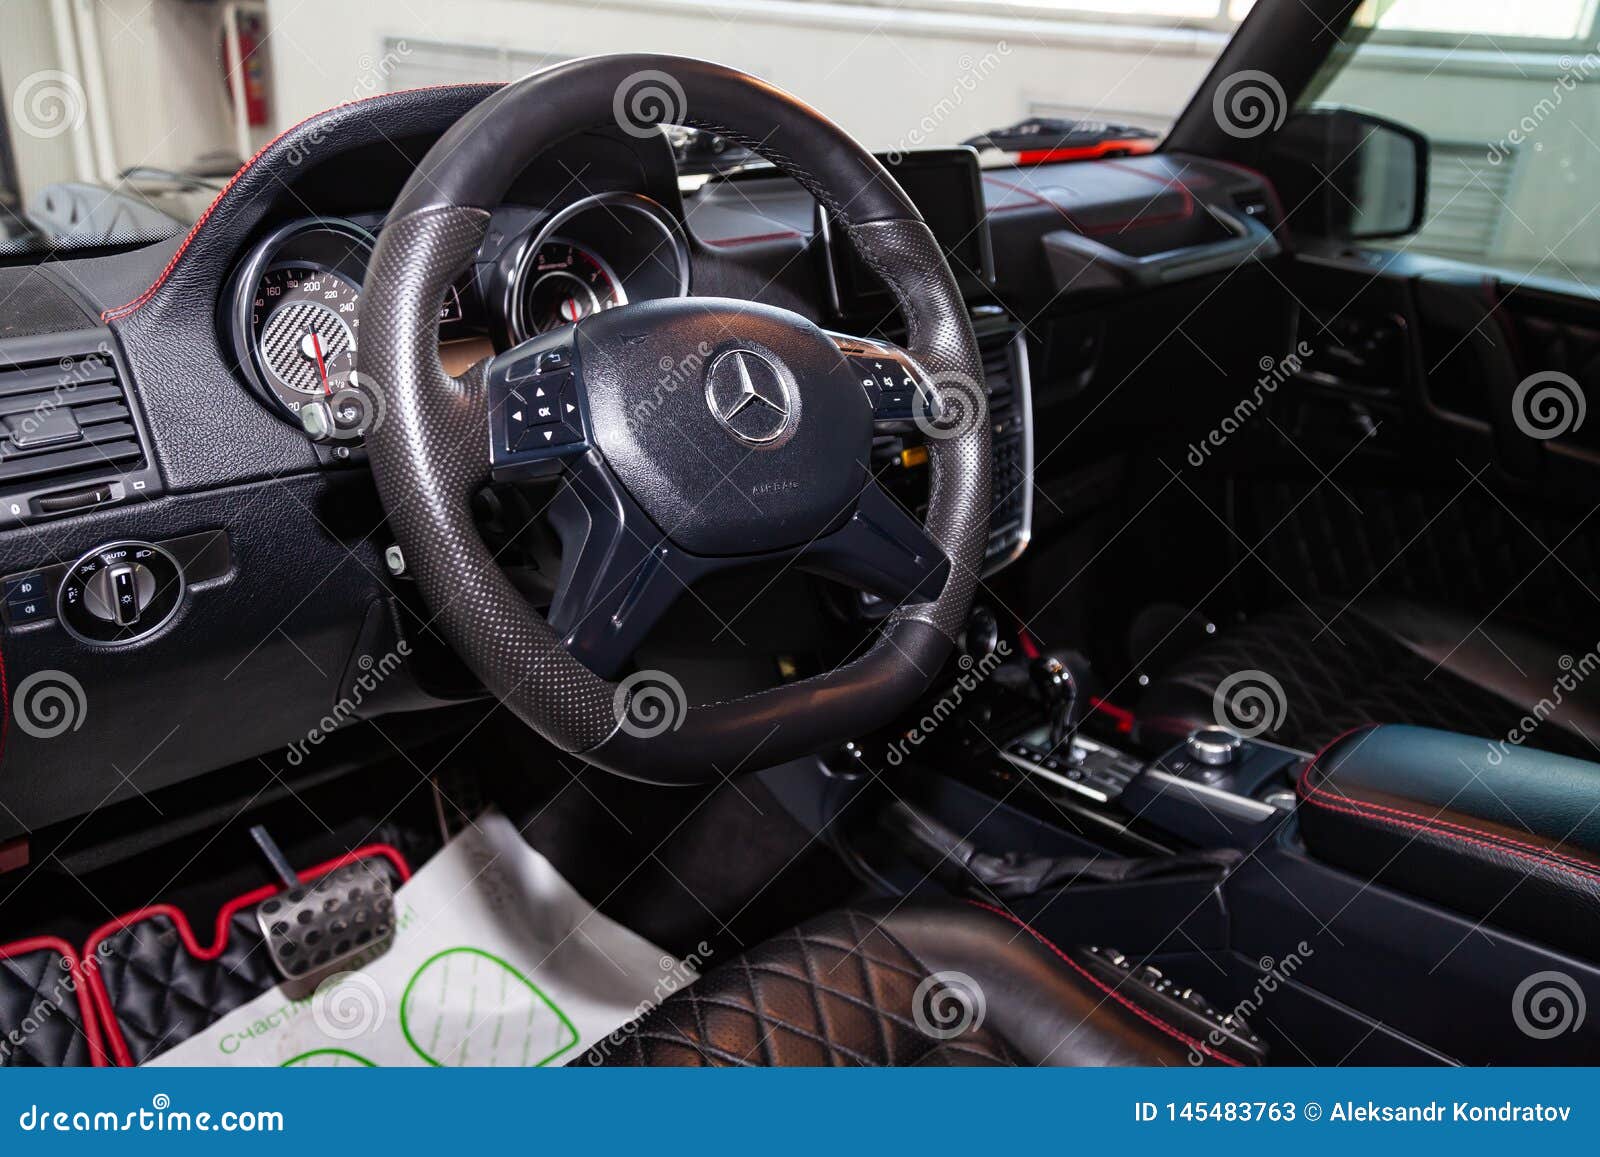 The Interior Of The Car Mercedes Benz G Class G350 With A